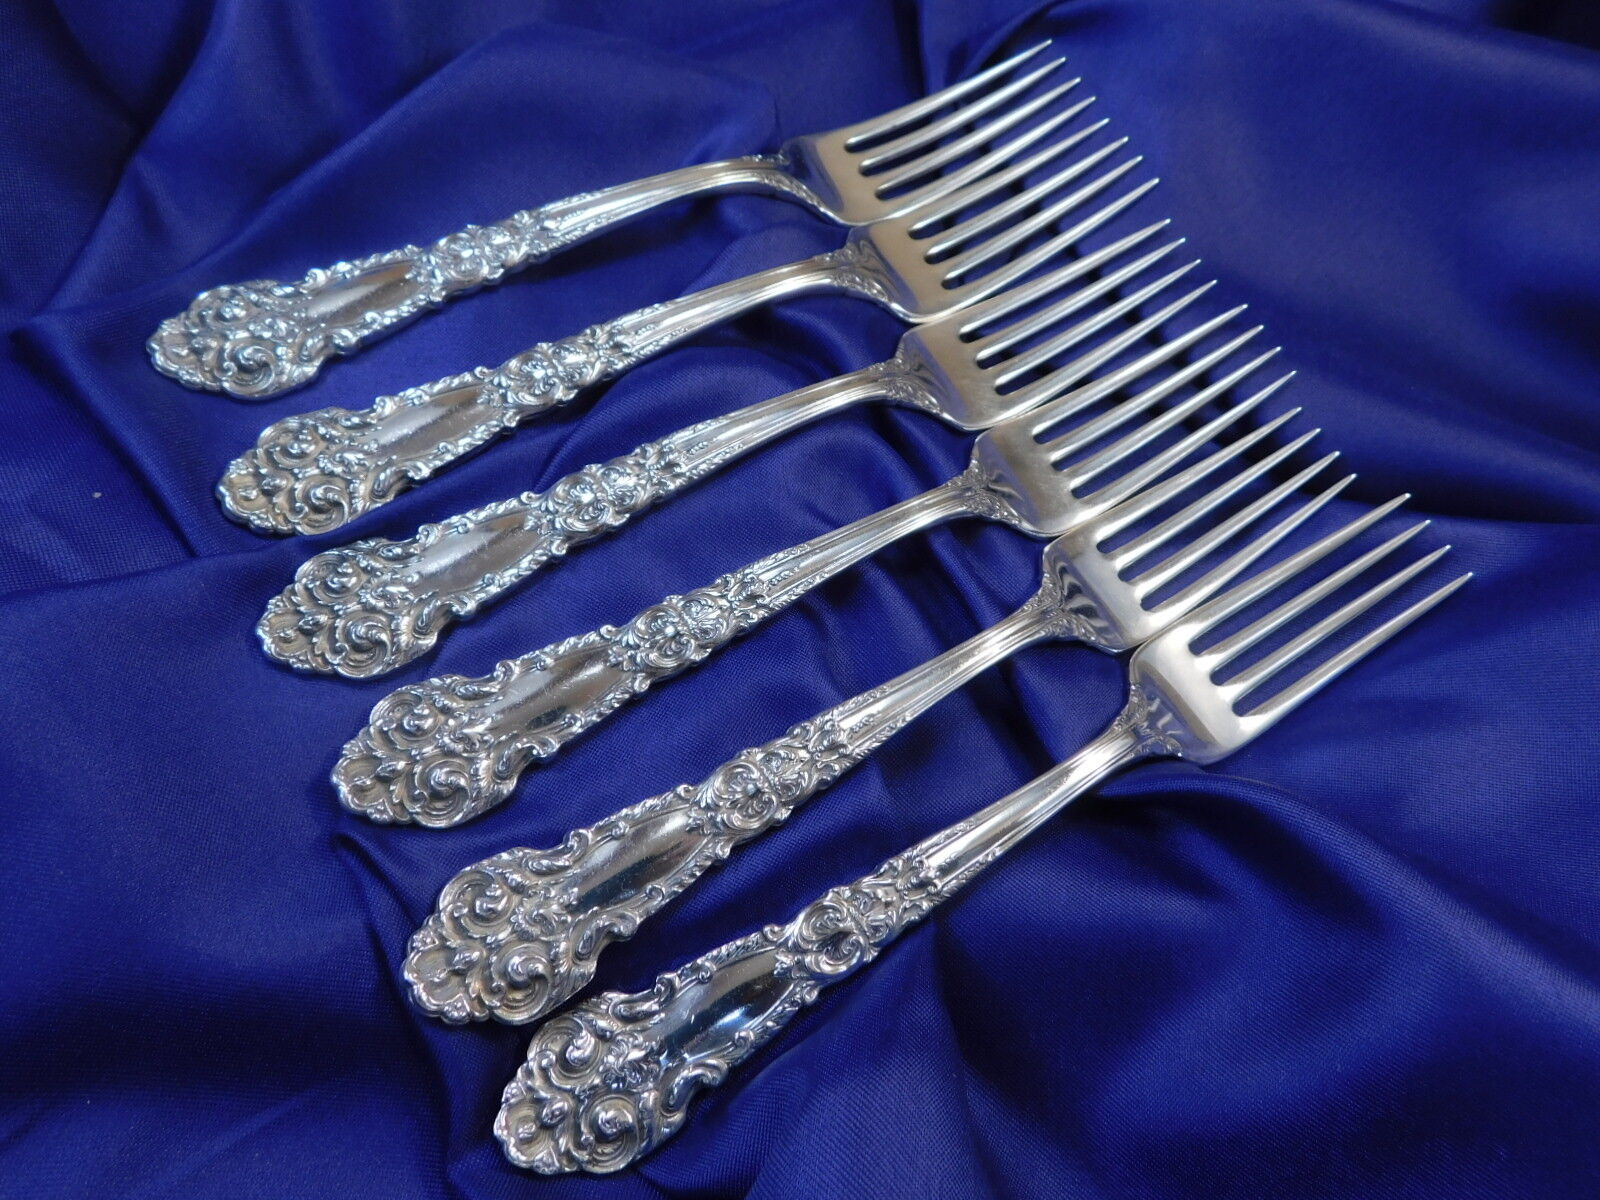 REED & BARTON FRENCH RENAISSANCE STERLING SILVER DINNER FORK - EXC COND S